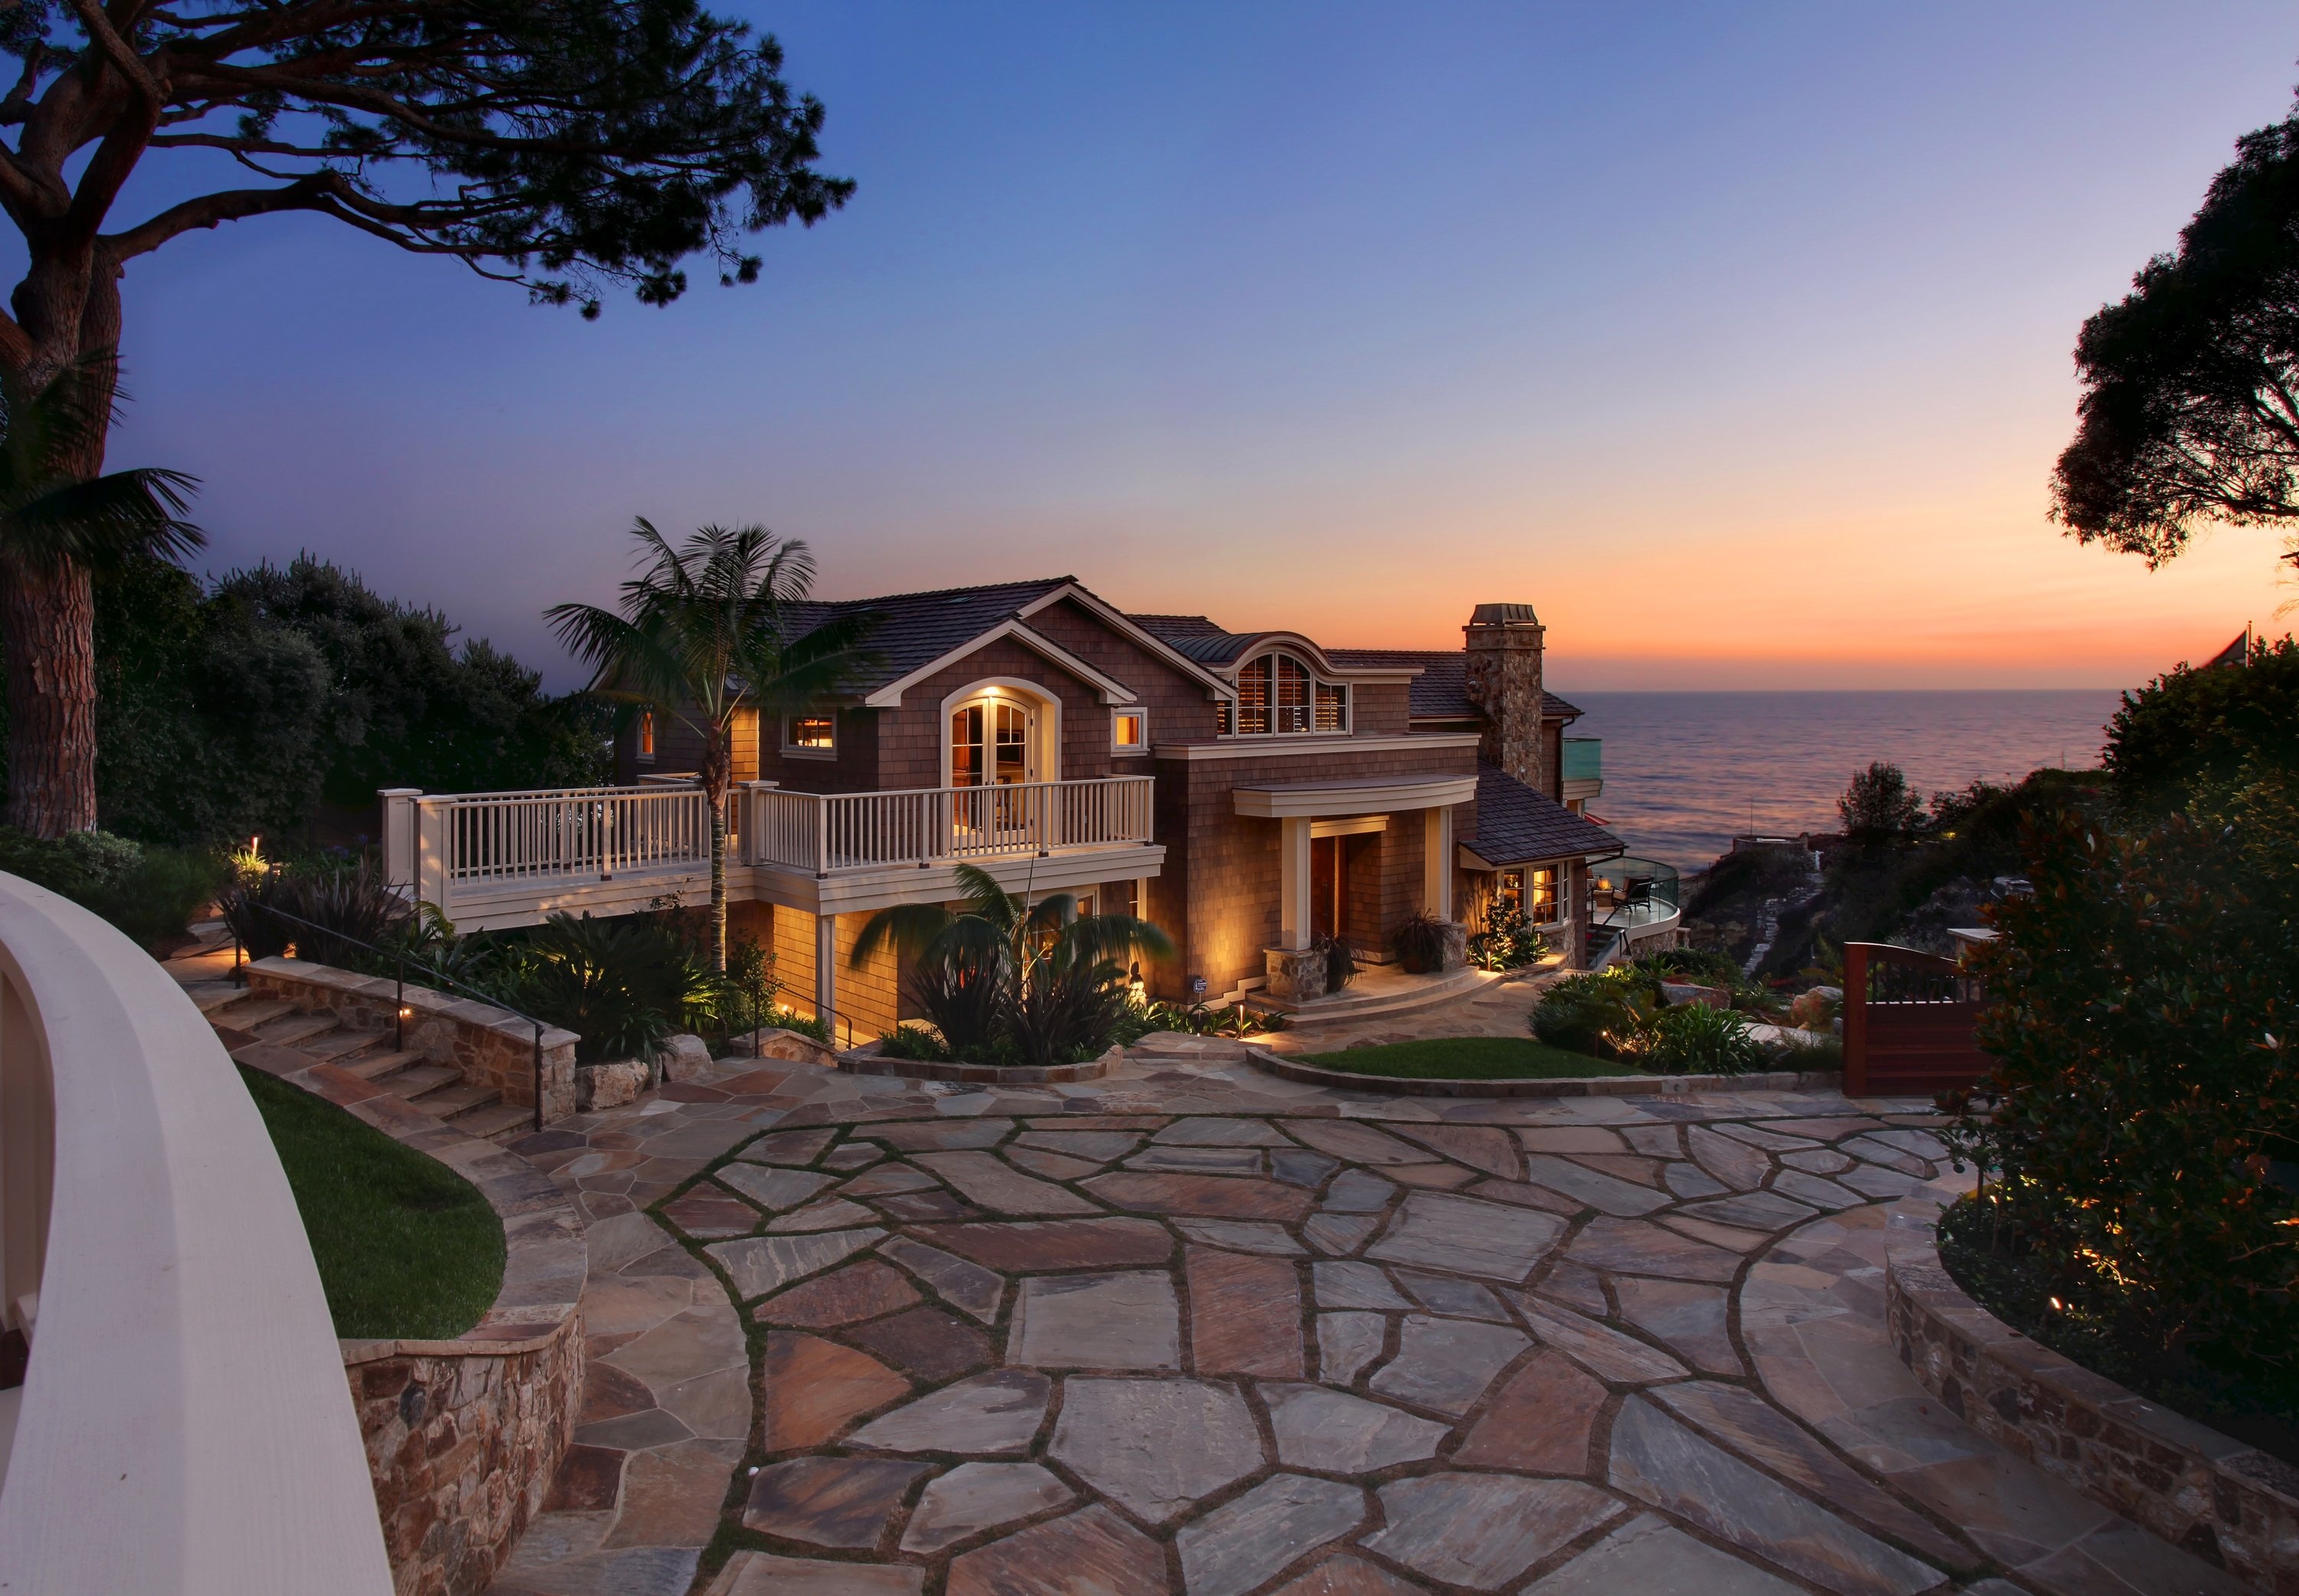 Mansion: Luxurious estate near the ocean coast in California, Private property made of rock. 3000x2090 HD Wallpaper.